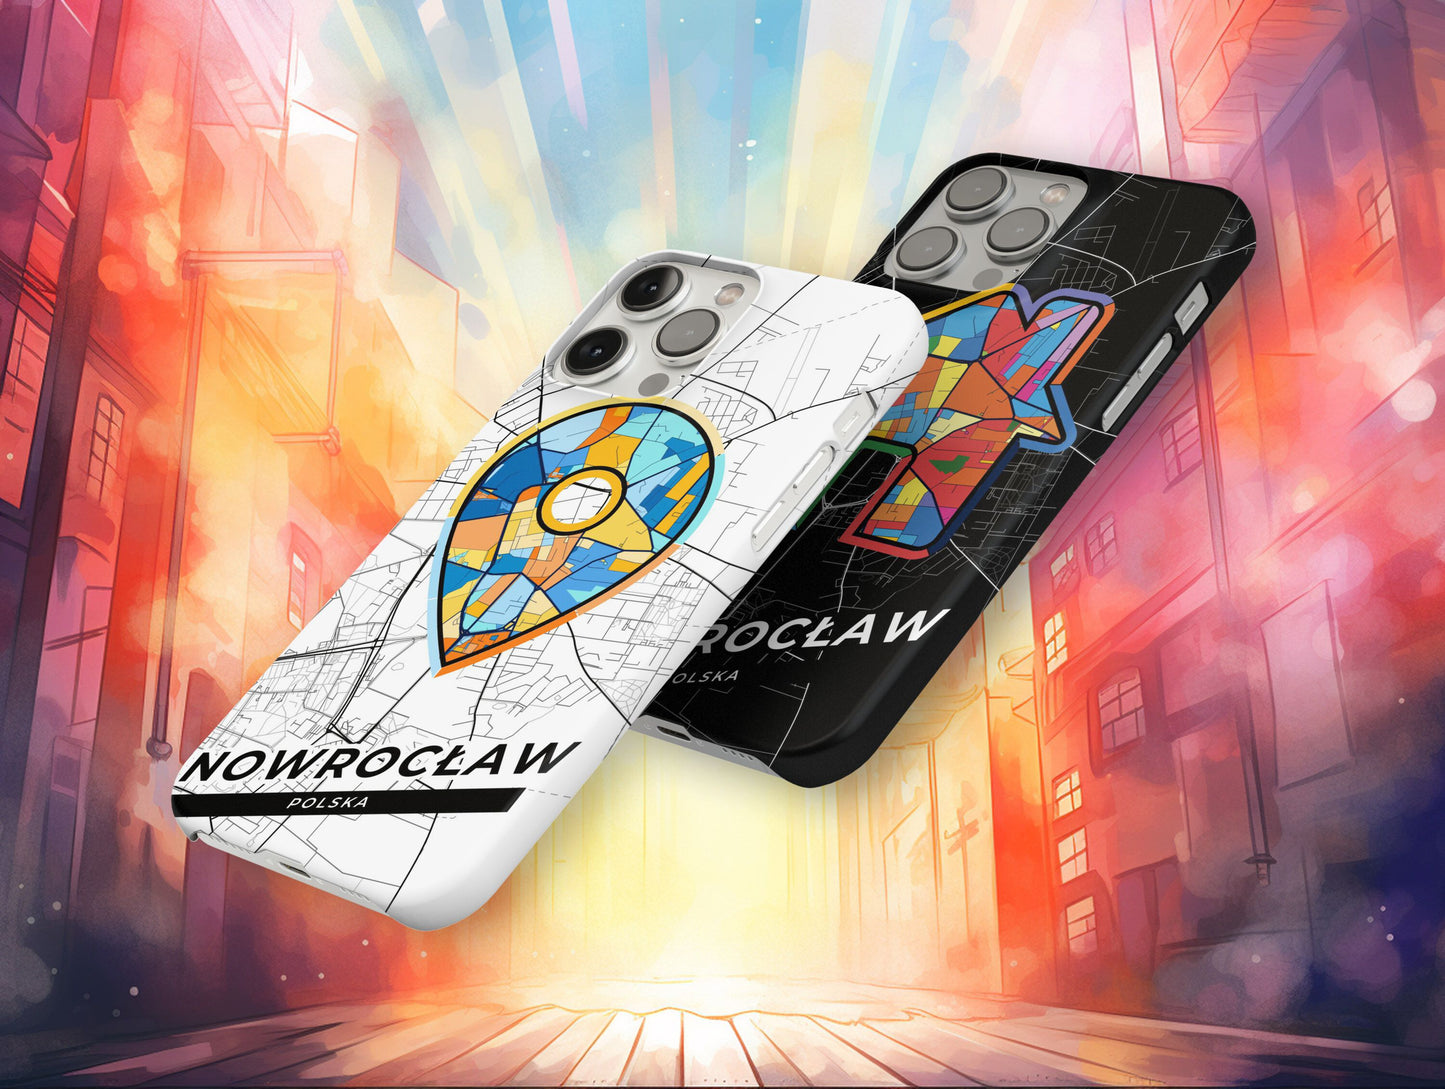 Inowrocław Poland slim phone case with colorful icon. Birthday, wedding or housewarming gift. Couple match cases.